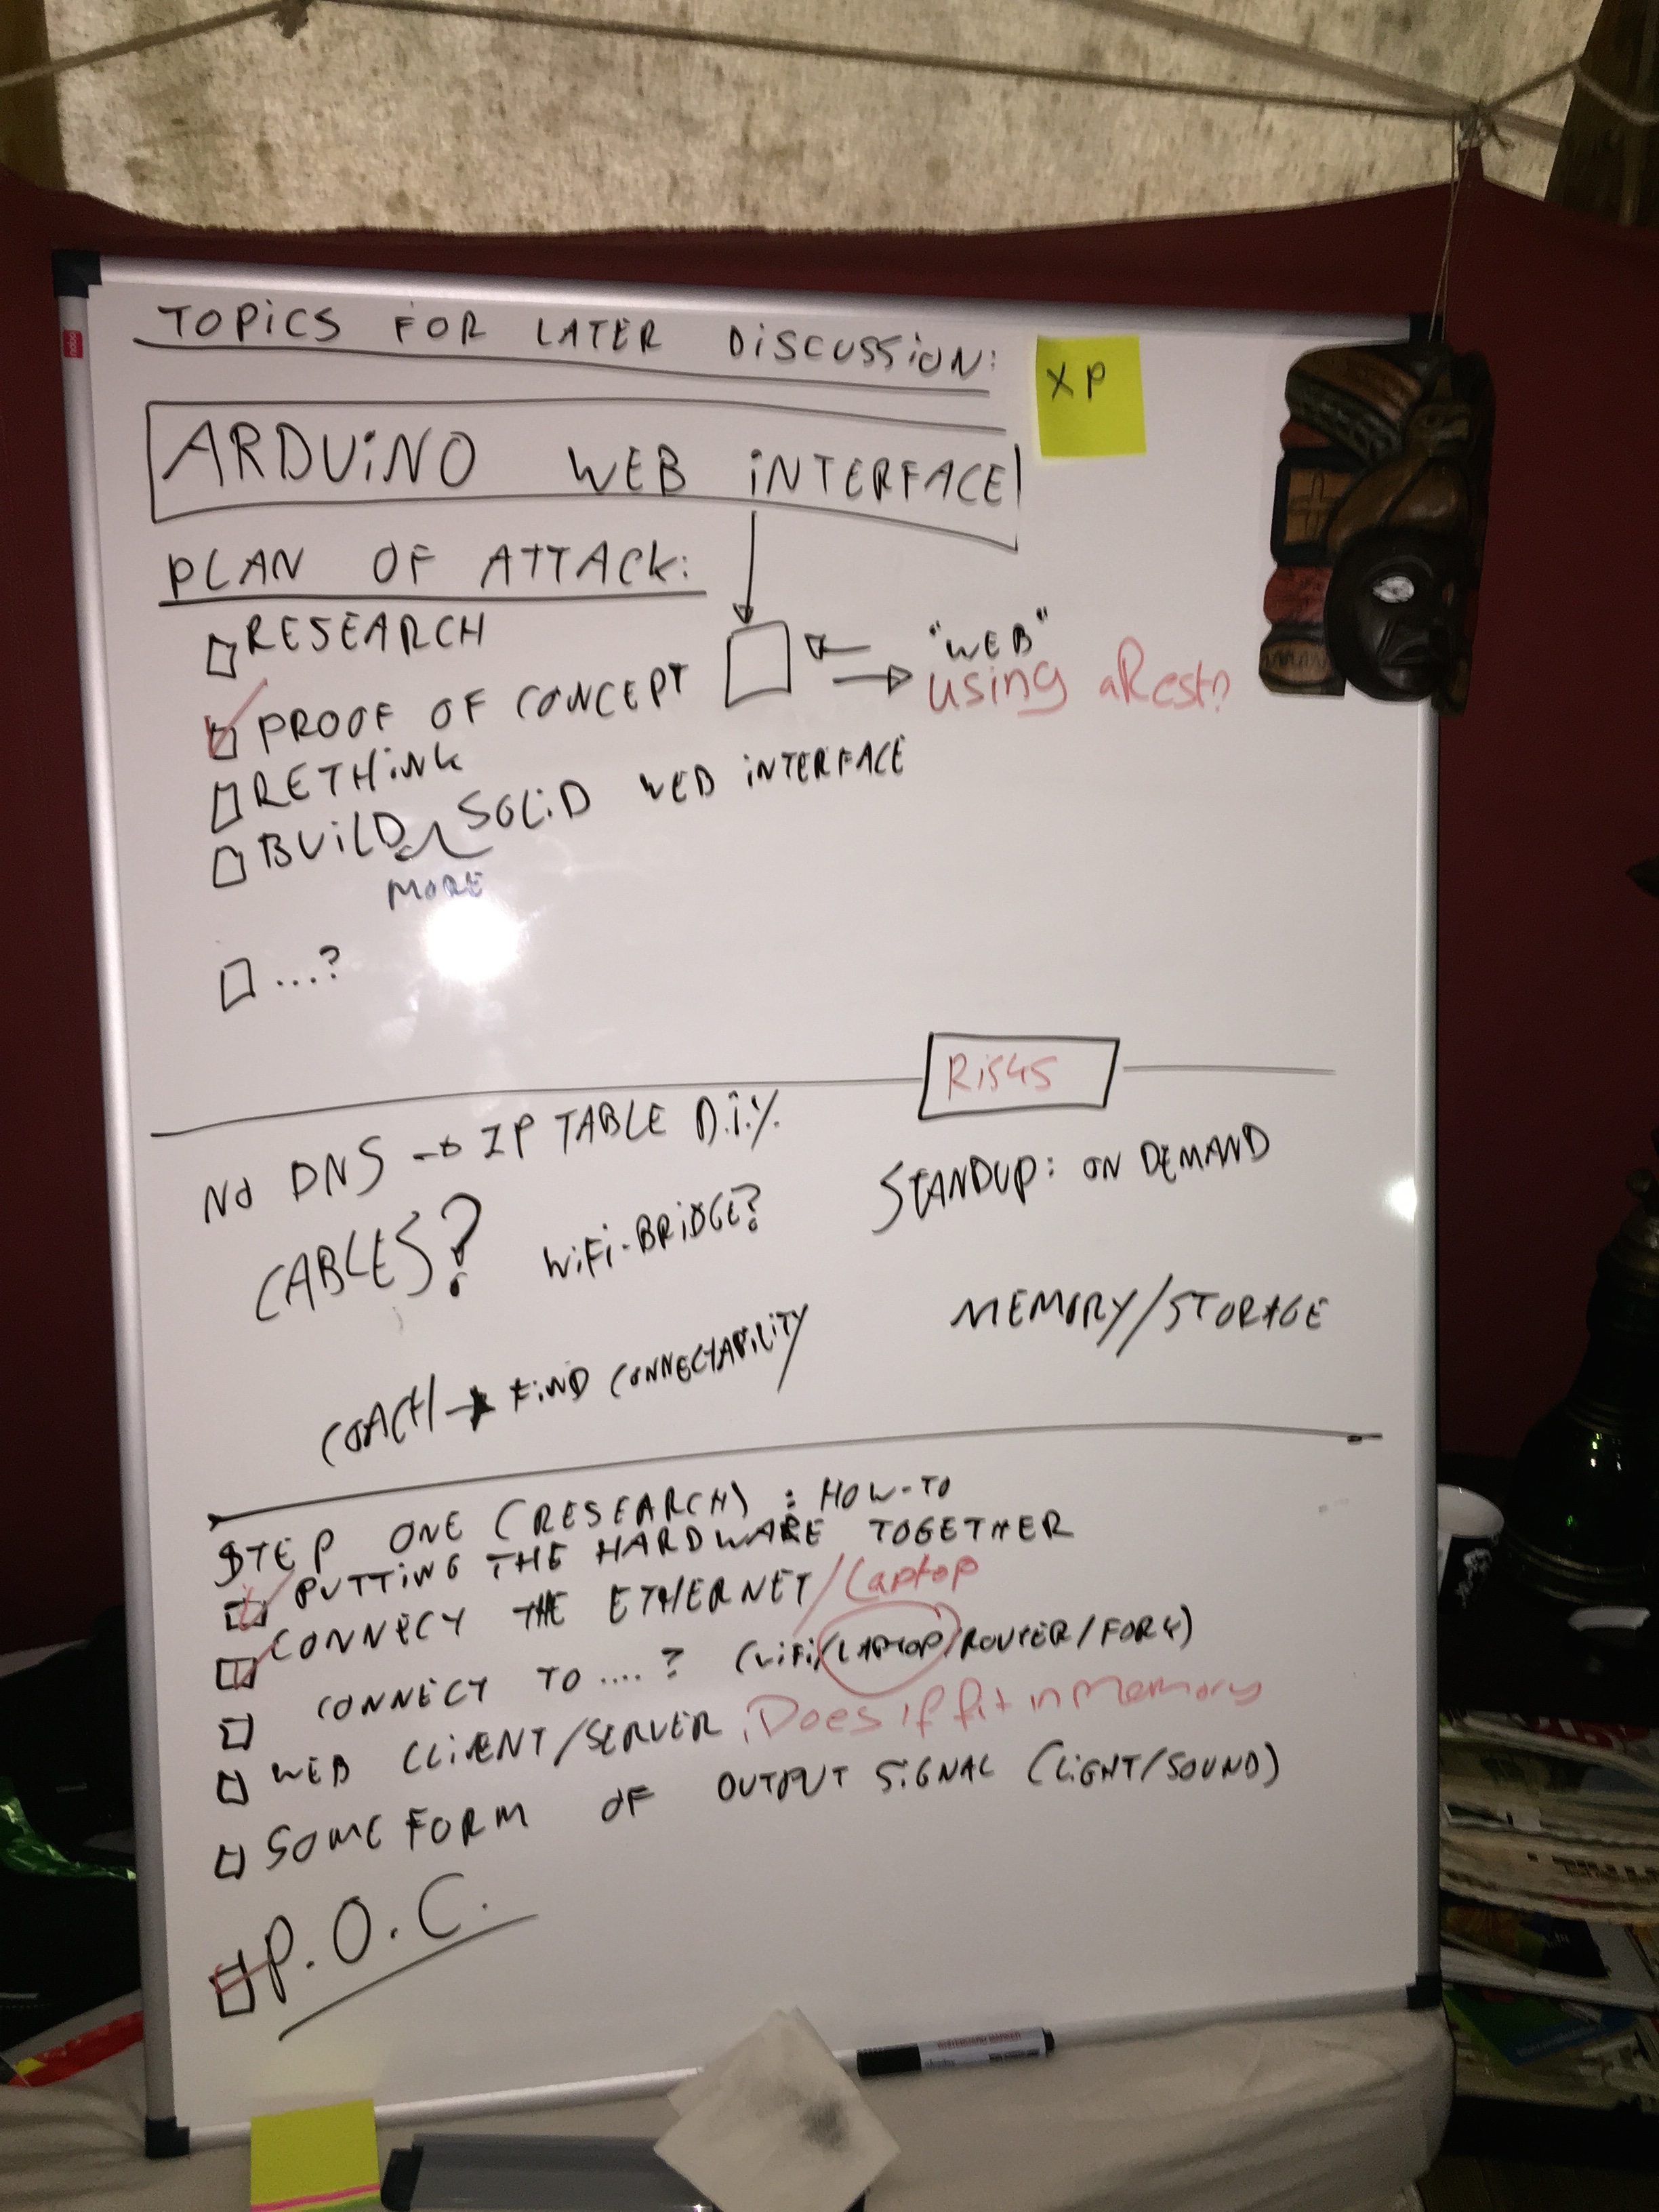 Second photo of the whiteboard